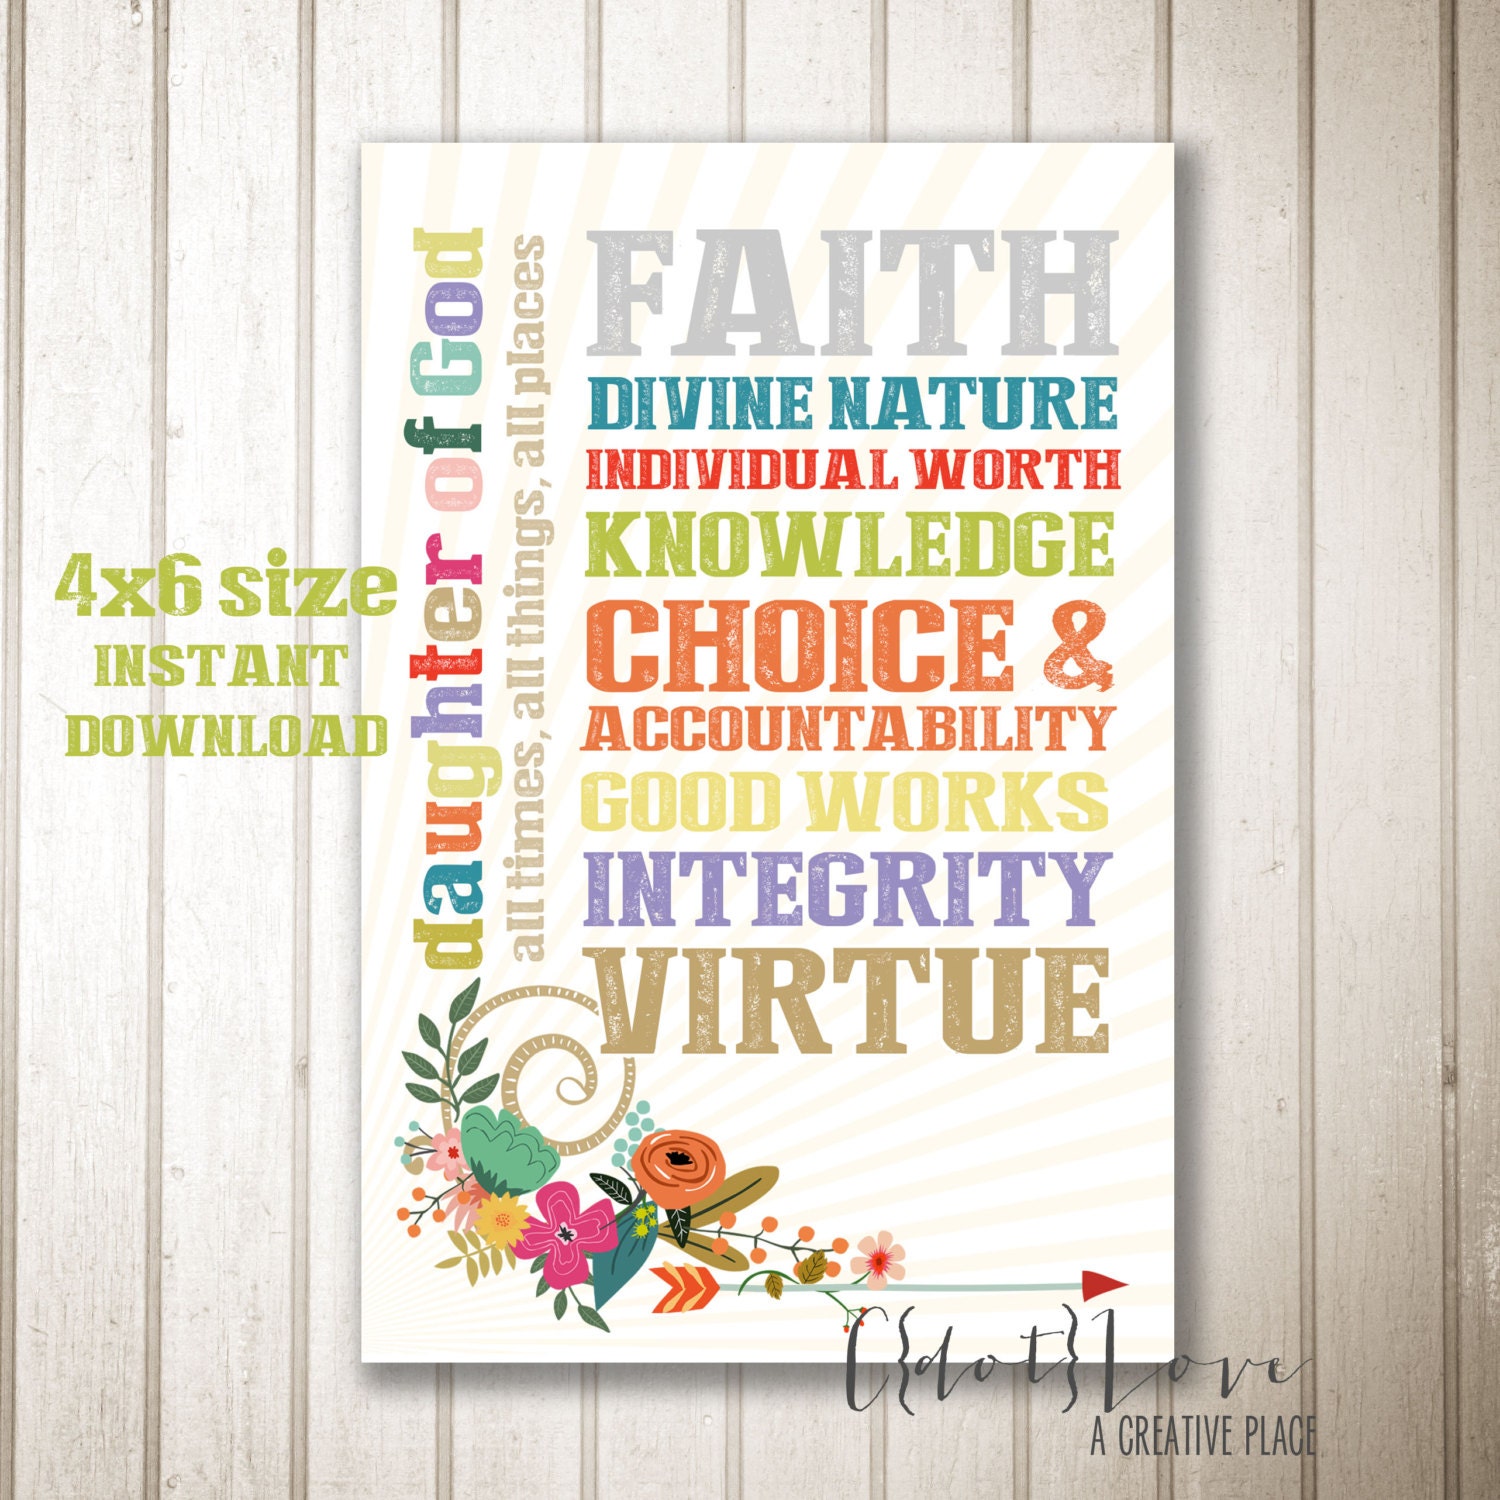 complete list of all the values and virtues